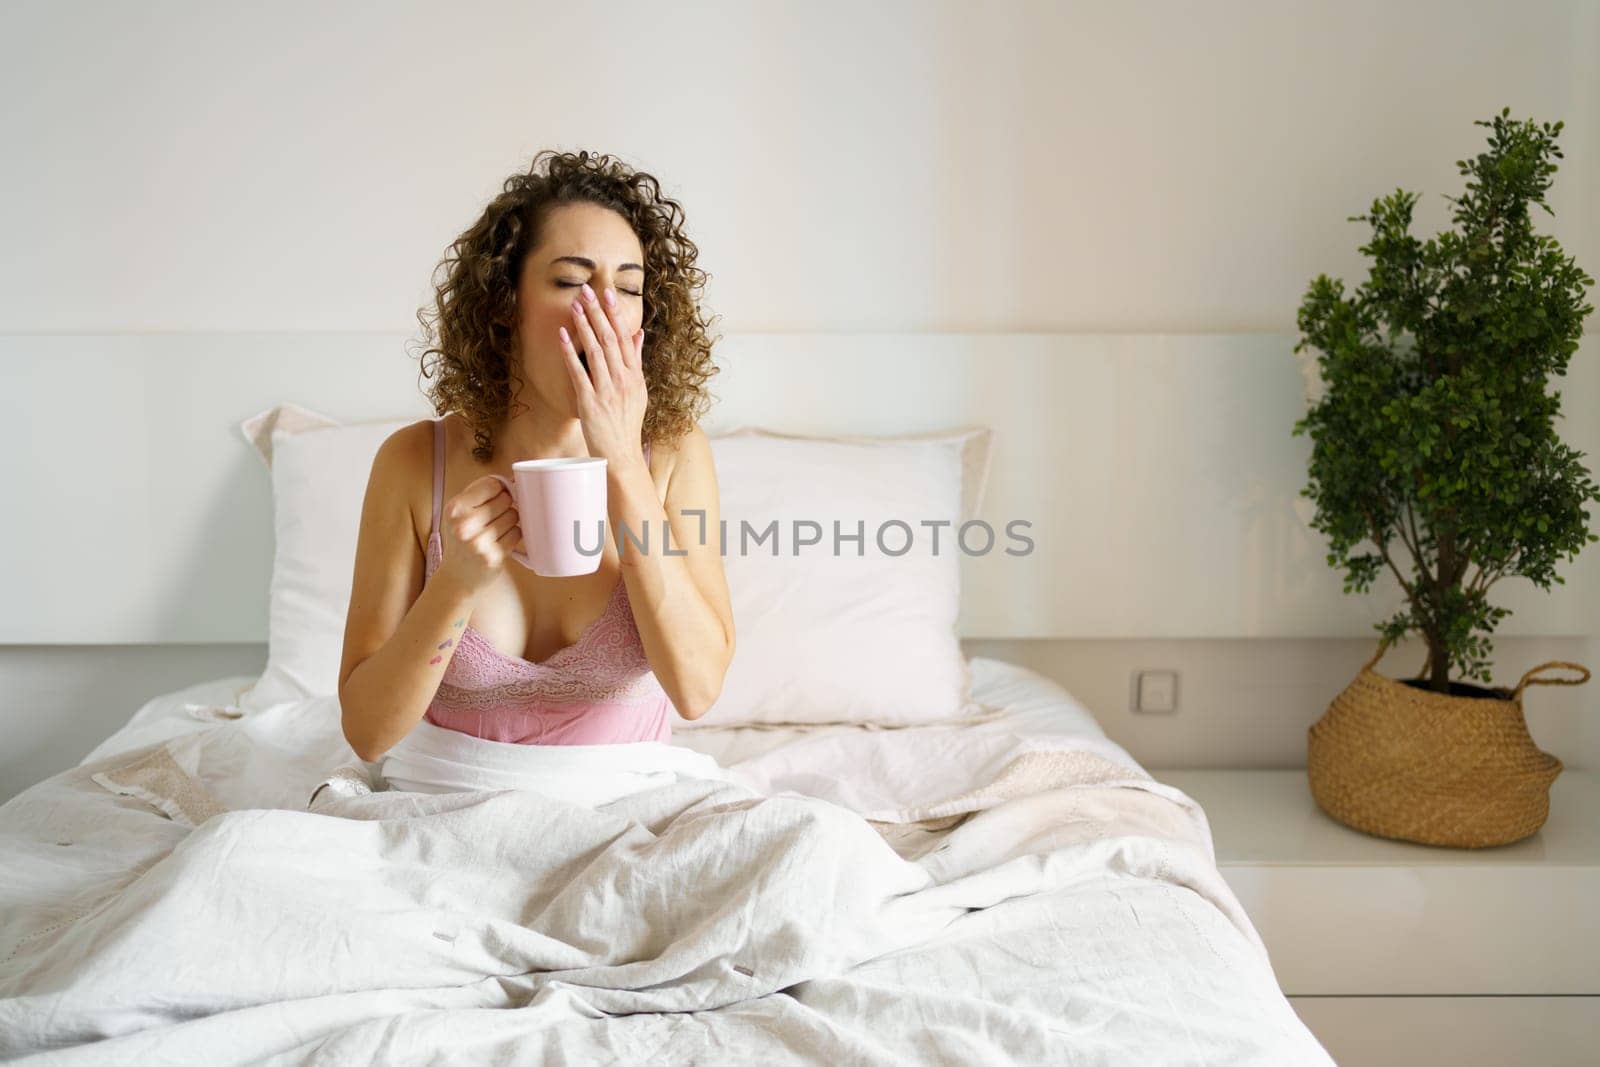 Young woman in nightwear yawning while holding coffee mug in bed during morning